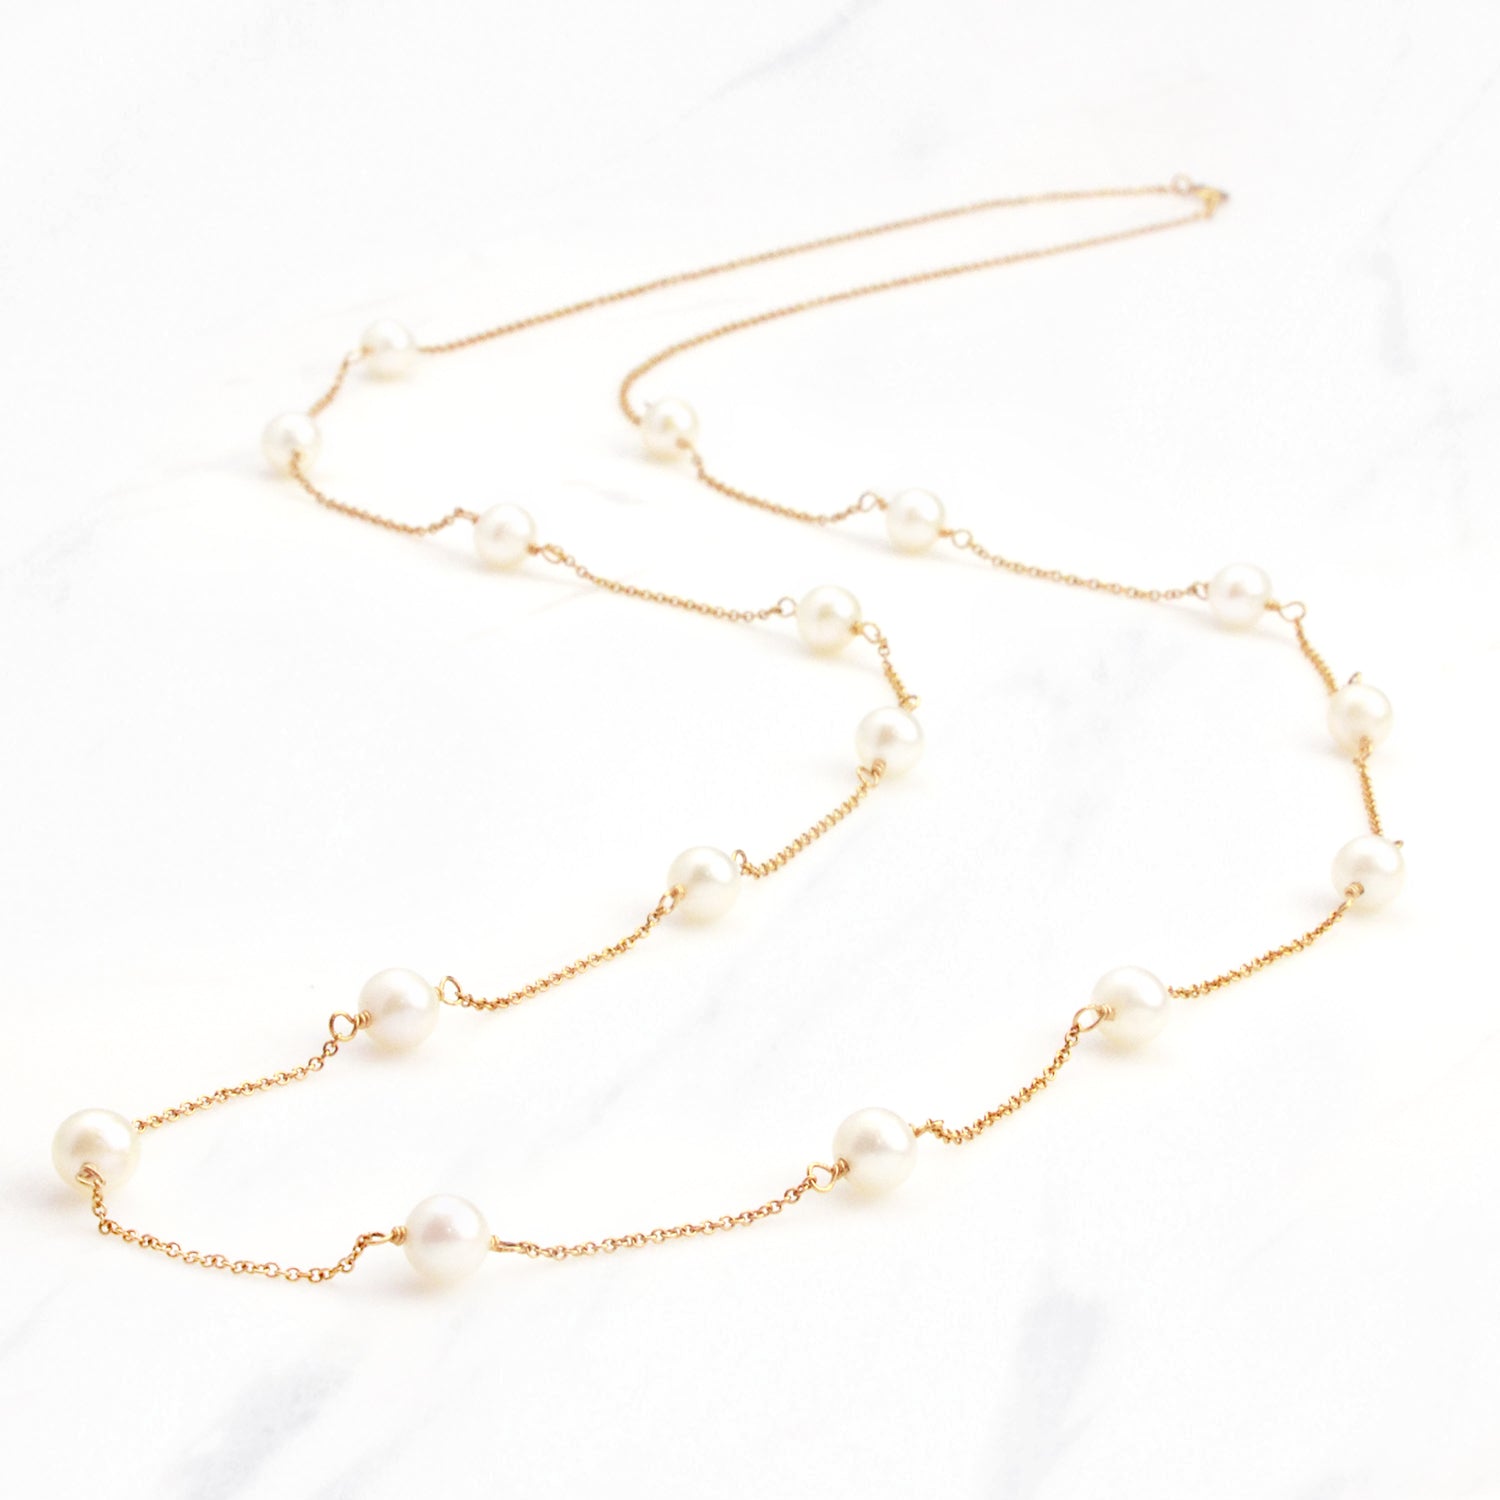 7mm Single Pearl Necklace (80cm)